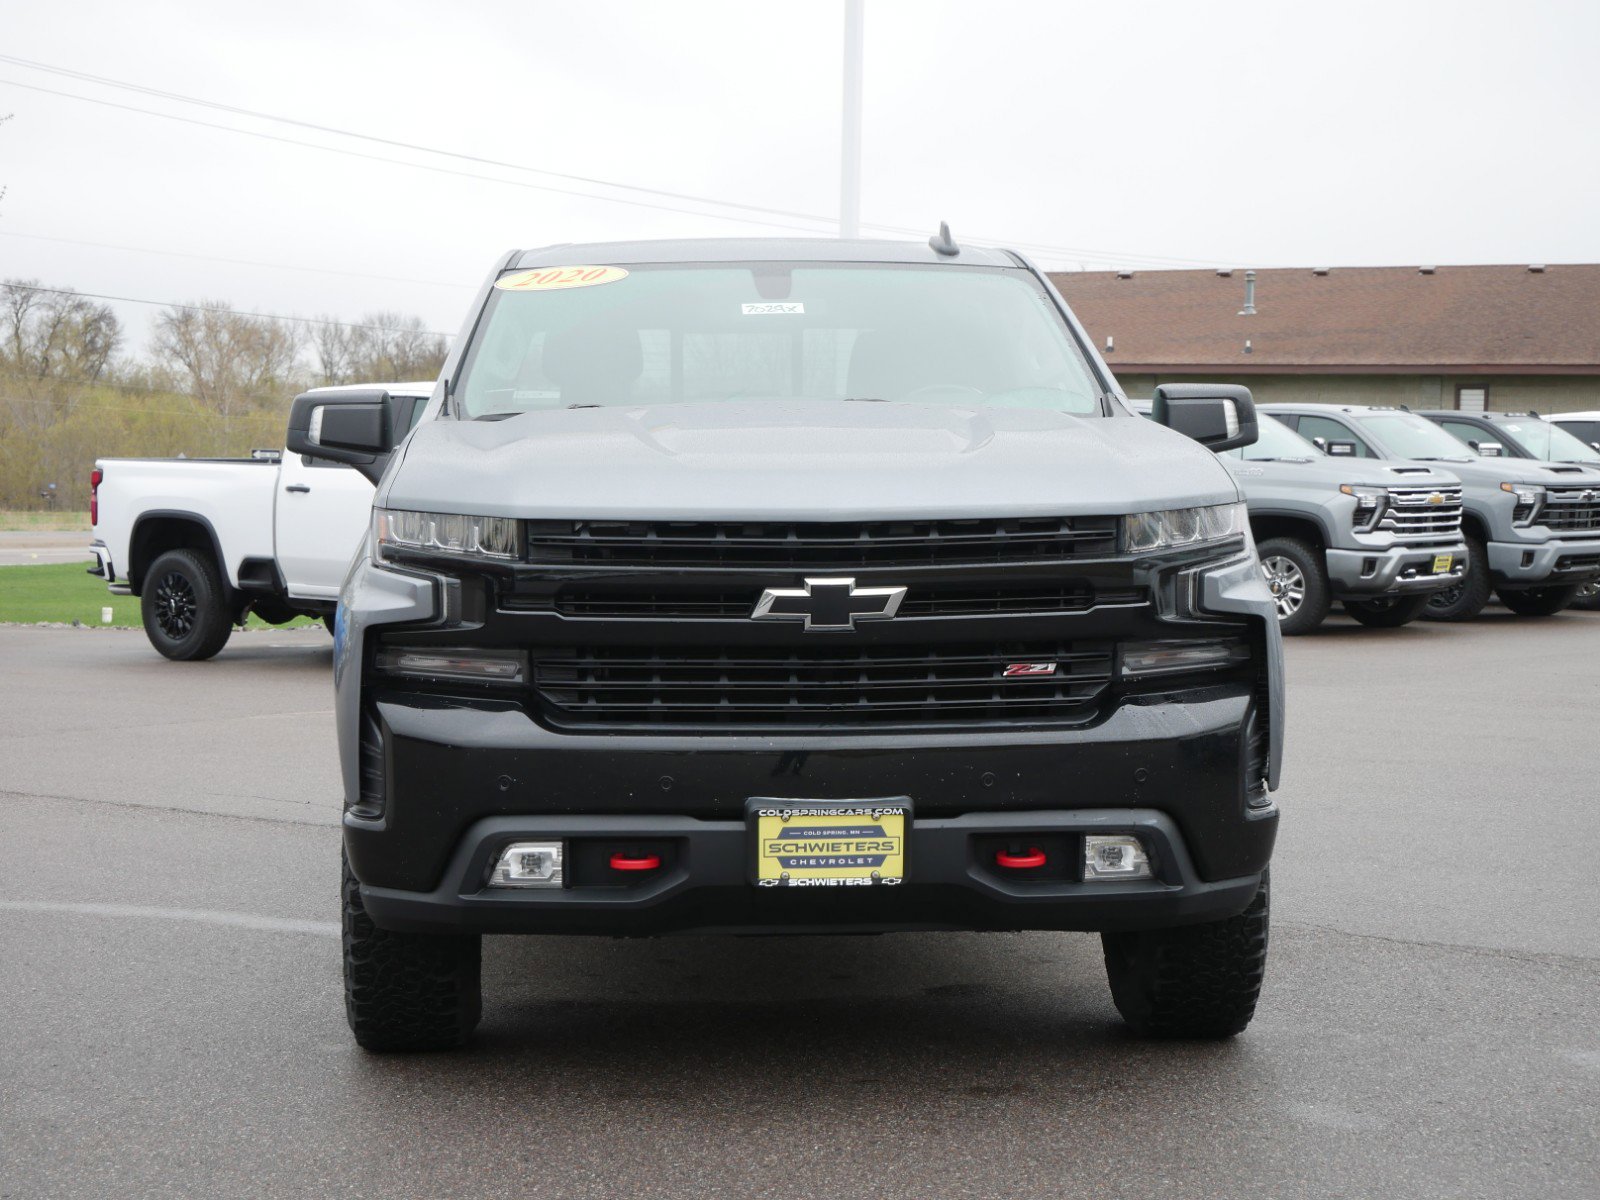 Used 2020 Chevrolet Silverado 1500 LT Trail Boss with VIN 3GCPYFEDXLG338009 for sale in Cold Spring, Minnesota